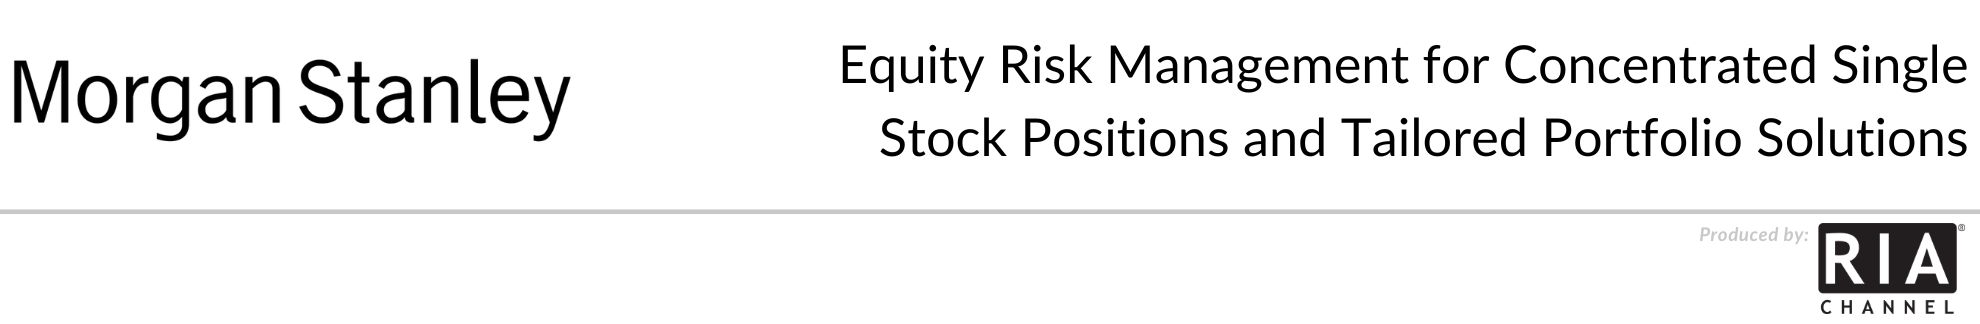 Equity Risk Management for Concentrated Single Stock Positions and Tailored Portfolio Solutions